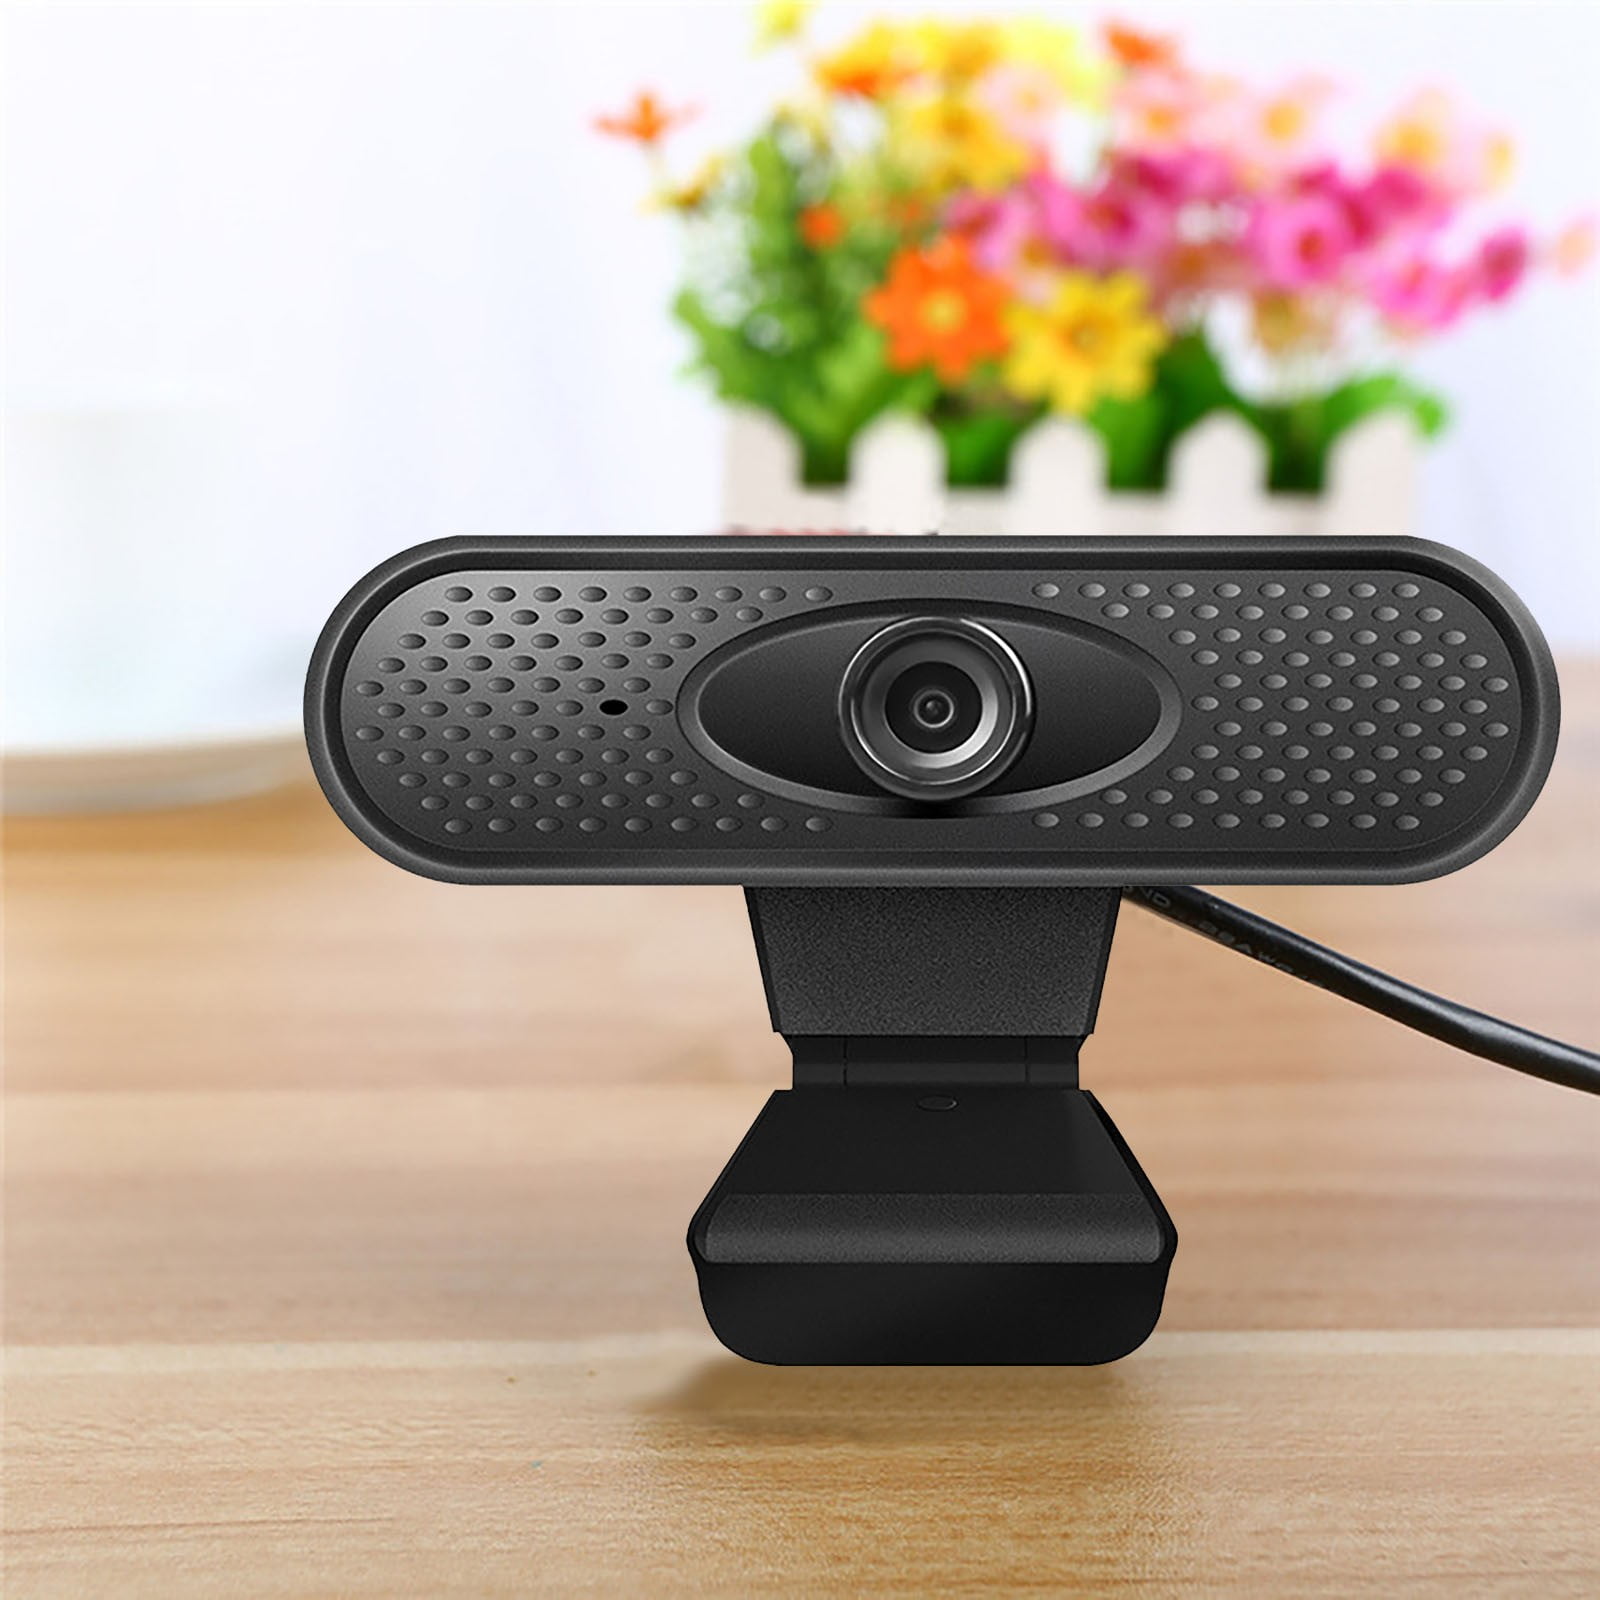 1080P 60FPS Webcam with Microphone,Unzano Full HD Webcam Wide Angle View  USB Computer Camera for Streaming Conference Online Teaching,Web Cameras  for Desktop Mac PC Laptop,Zoom/Skype/Facetime () - PCPartPicker